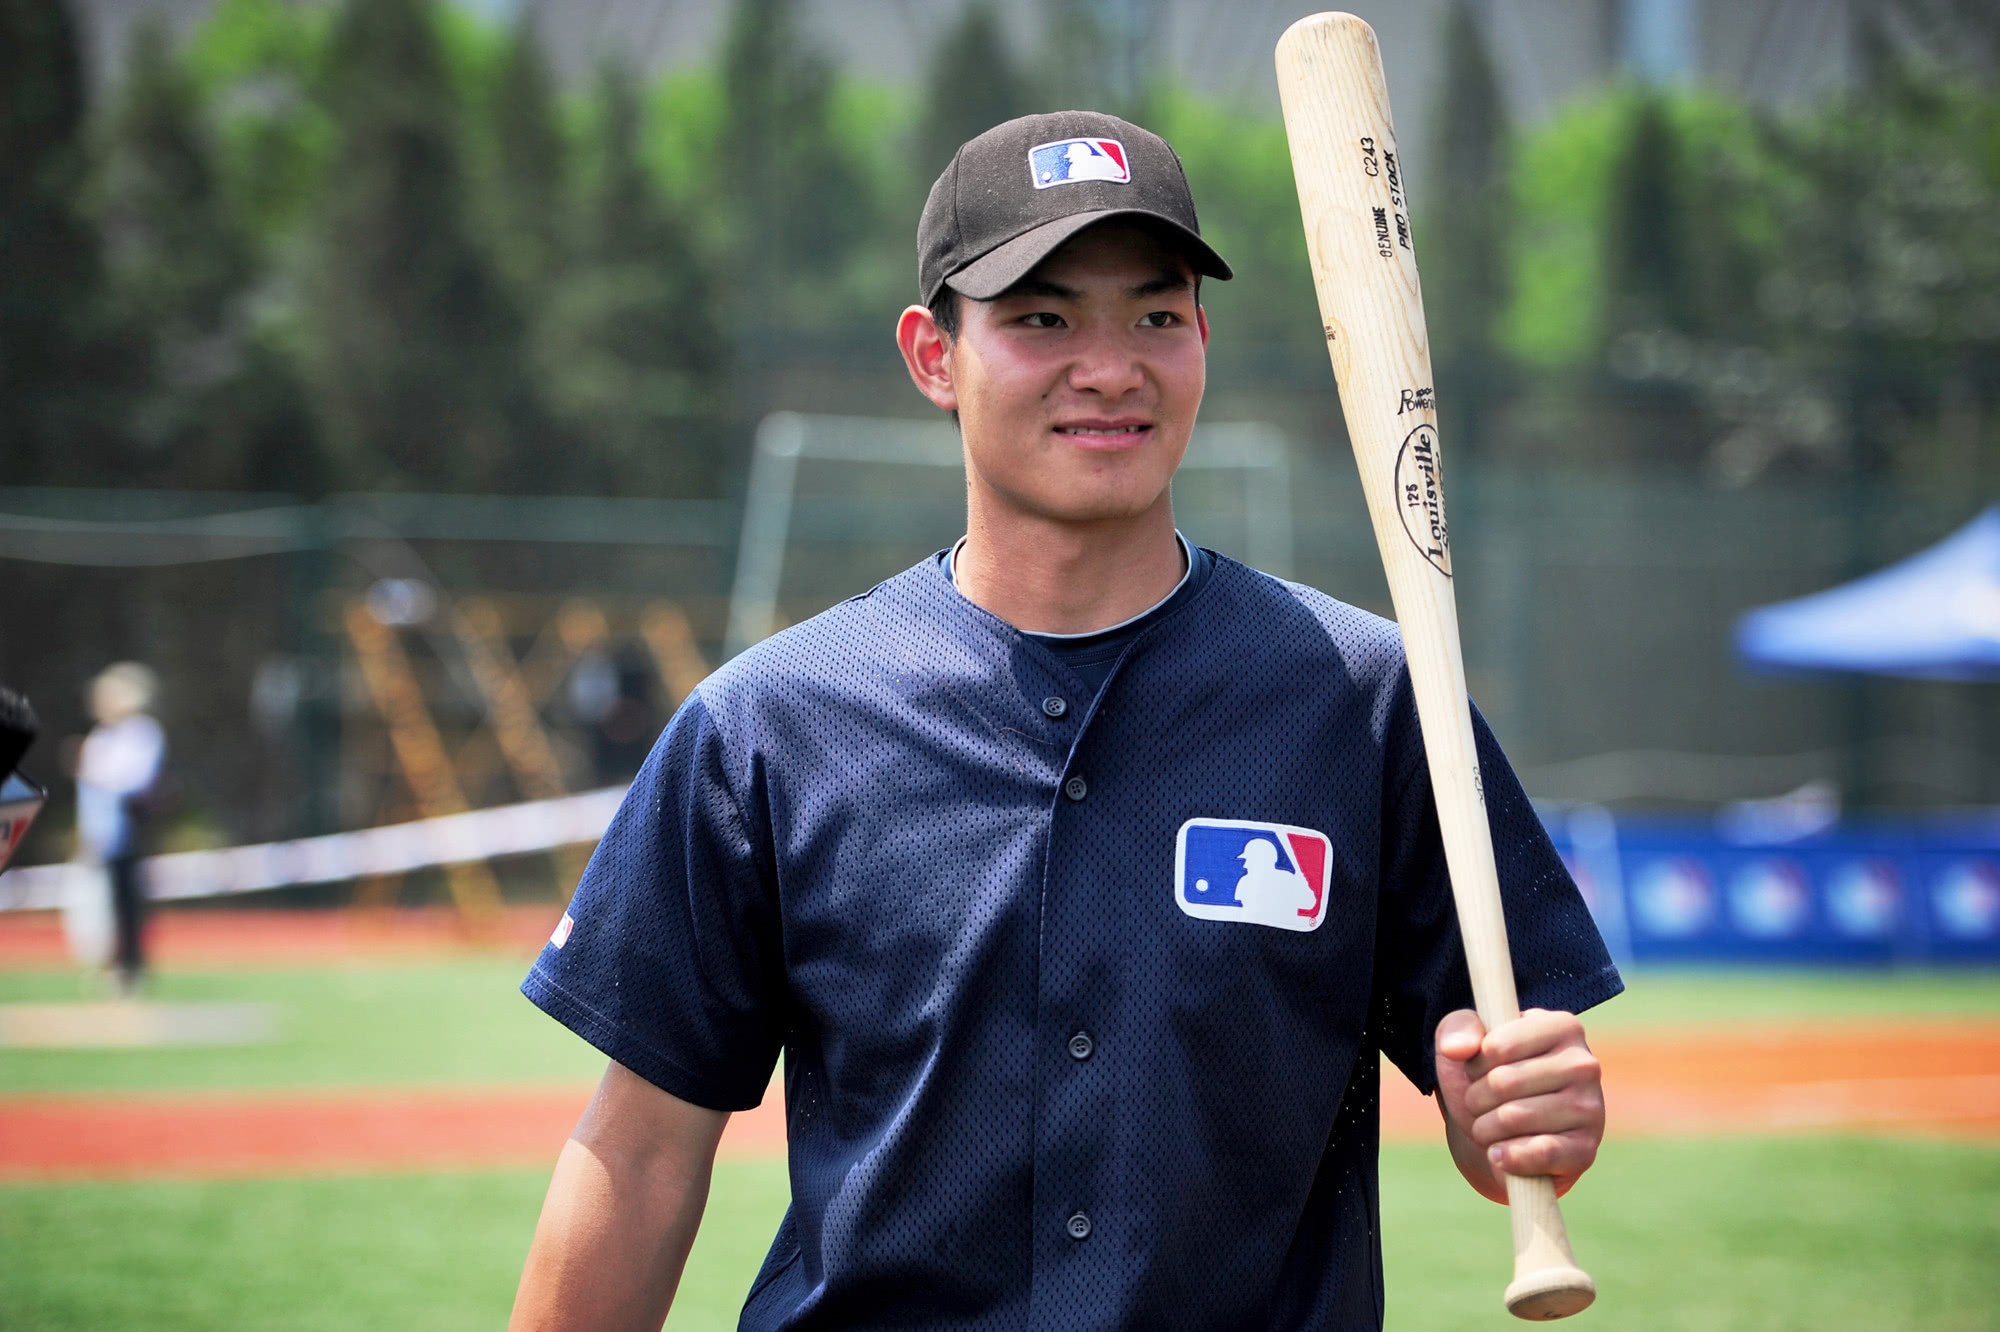 MLB DC player Xu Guiyuan signed Baltimore Jinyao, fans urgently expect him to board the big alliance as soon as possible